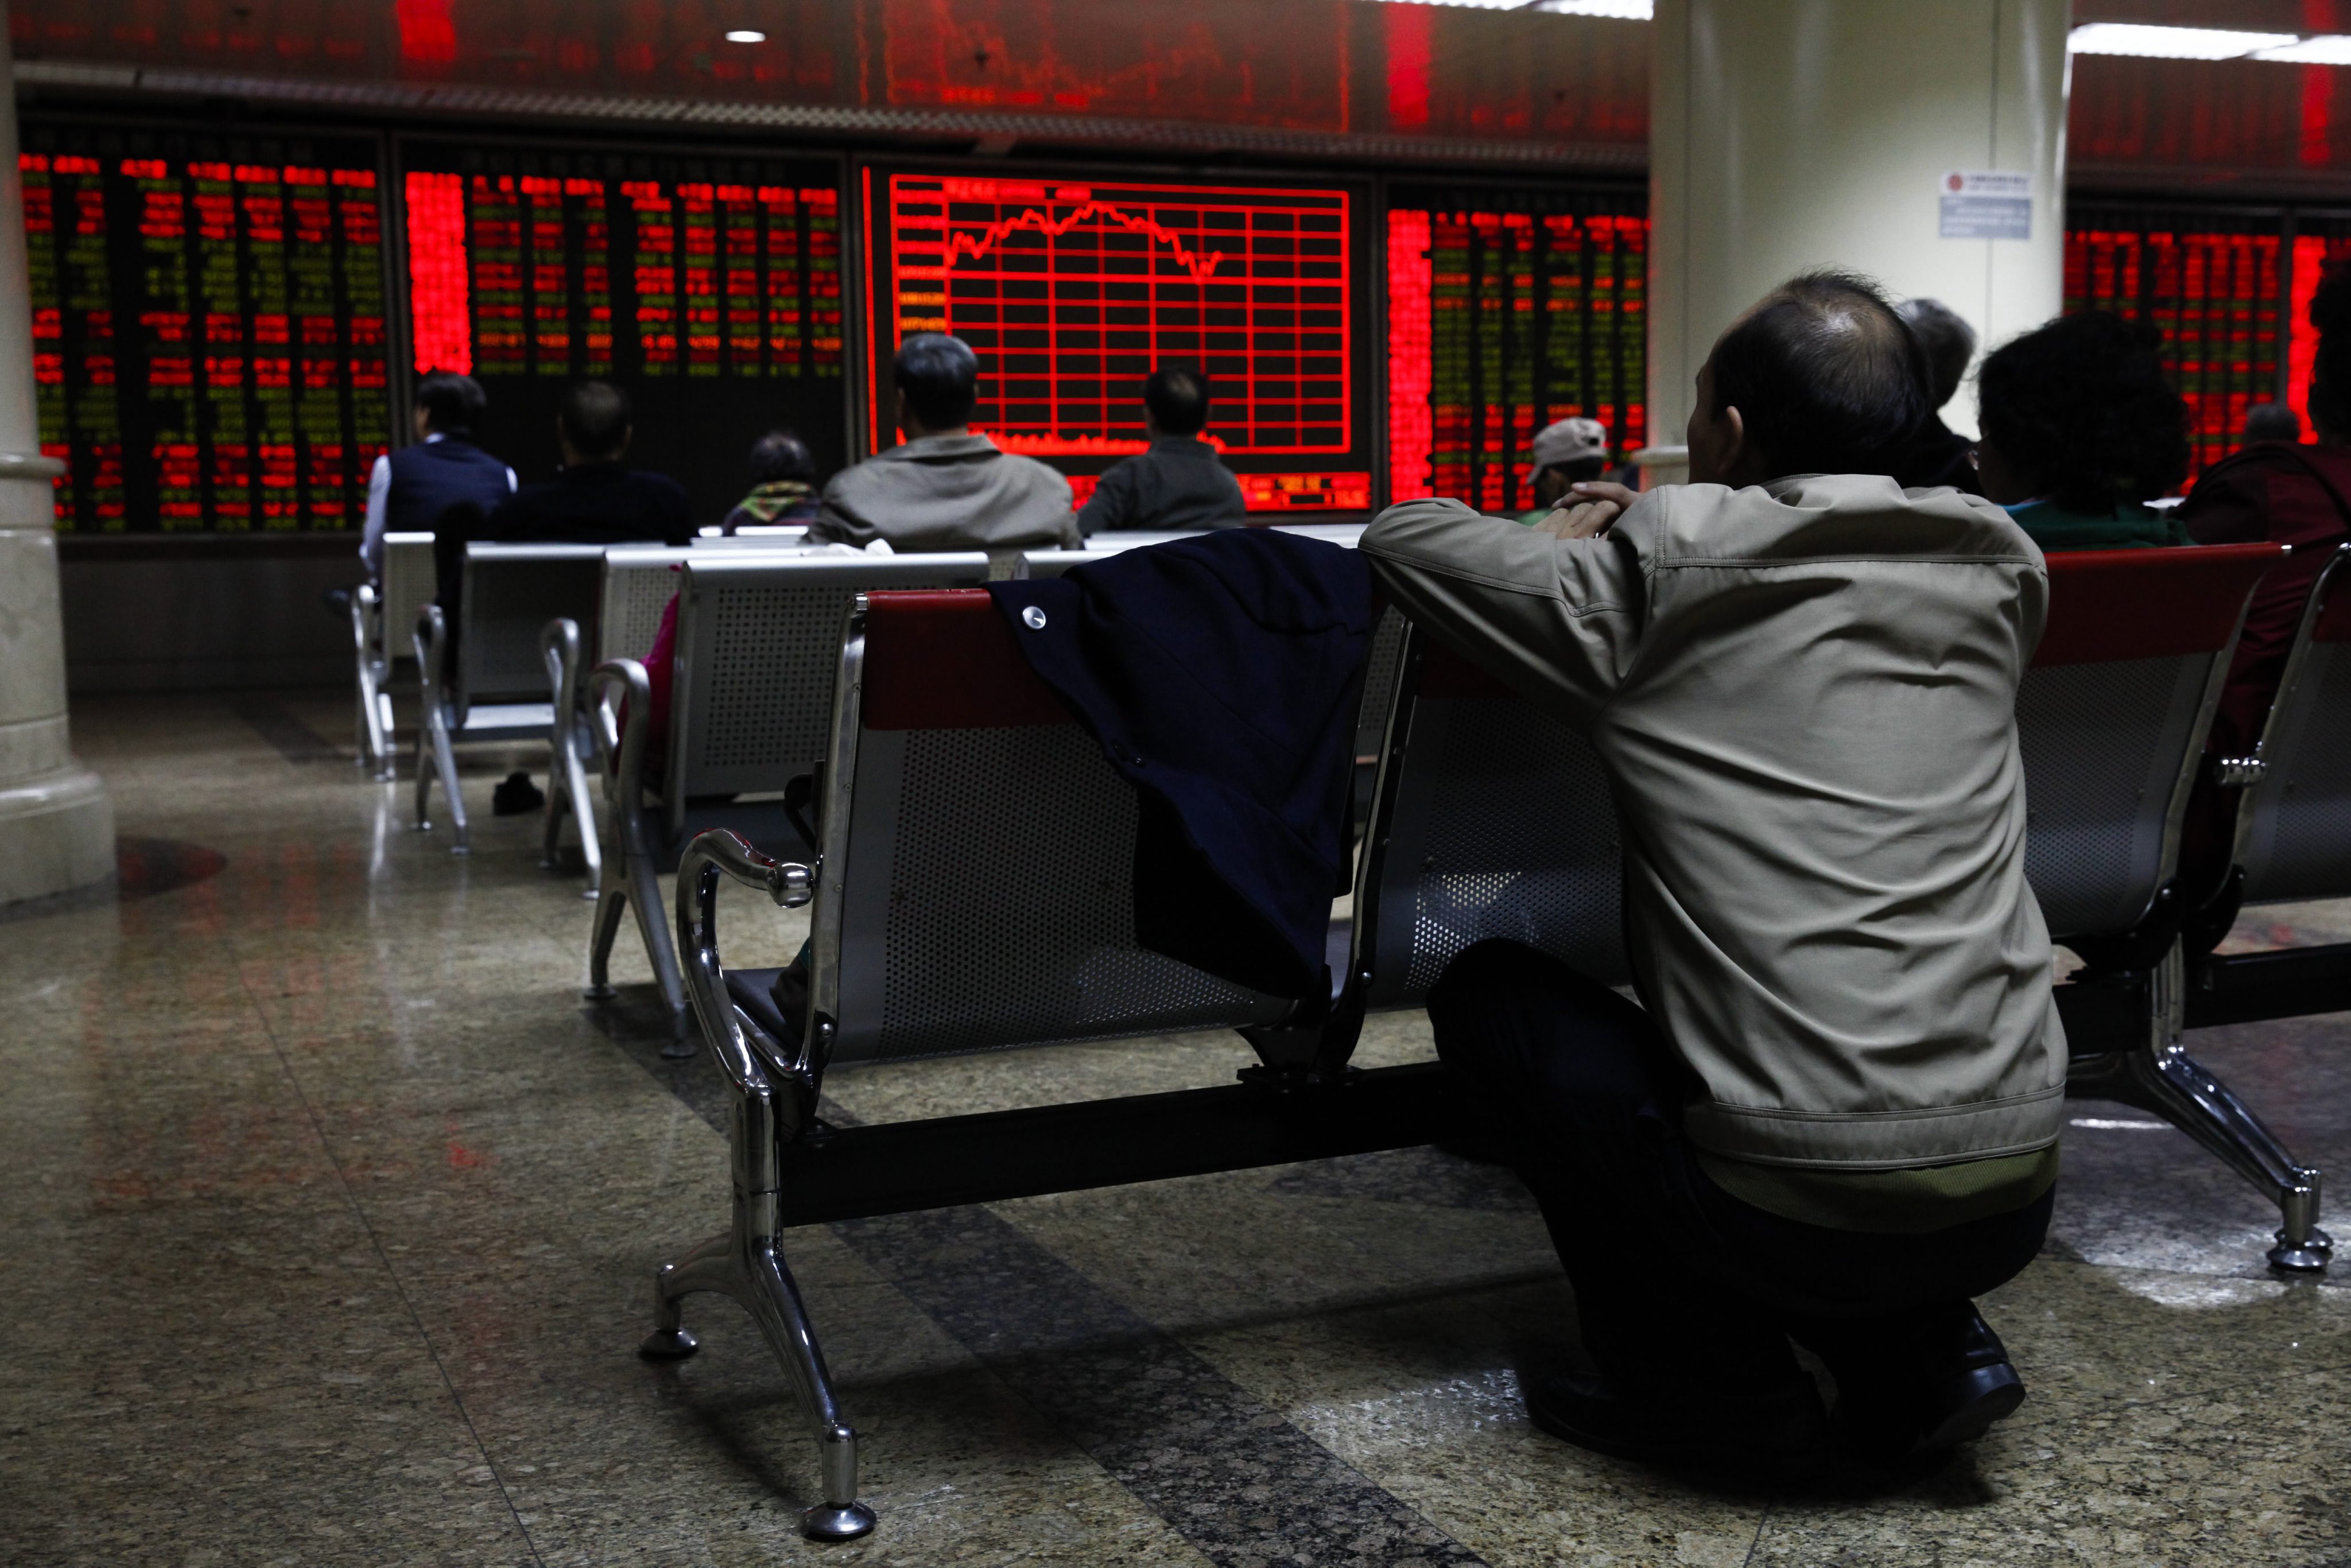 epa04988473 An investor looks at stock market data displayed on an electronic board at a securities brokerage house in Beijing, China, 22 October 2015. China's Shanghai Composite index closed up by 1.5 percent on 22 October, rebounding from a drop of 3.06 percent on 21 October which was the largest in a month. EPA/ROLEX DELA PENA